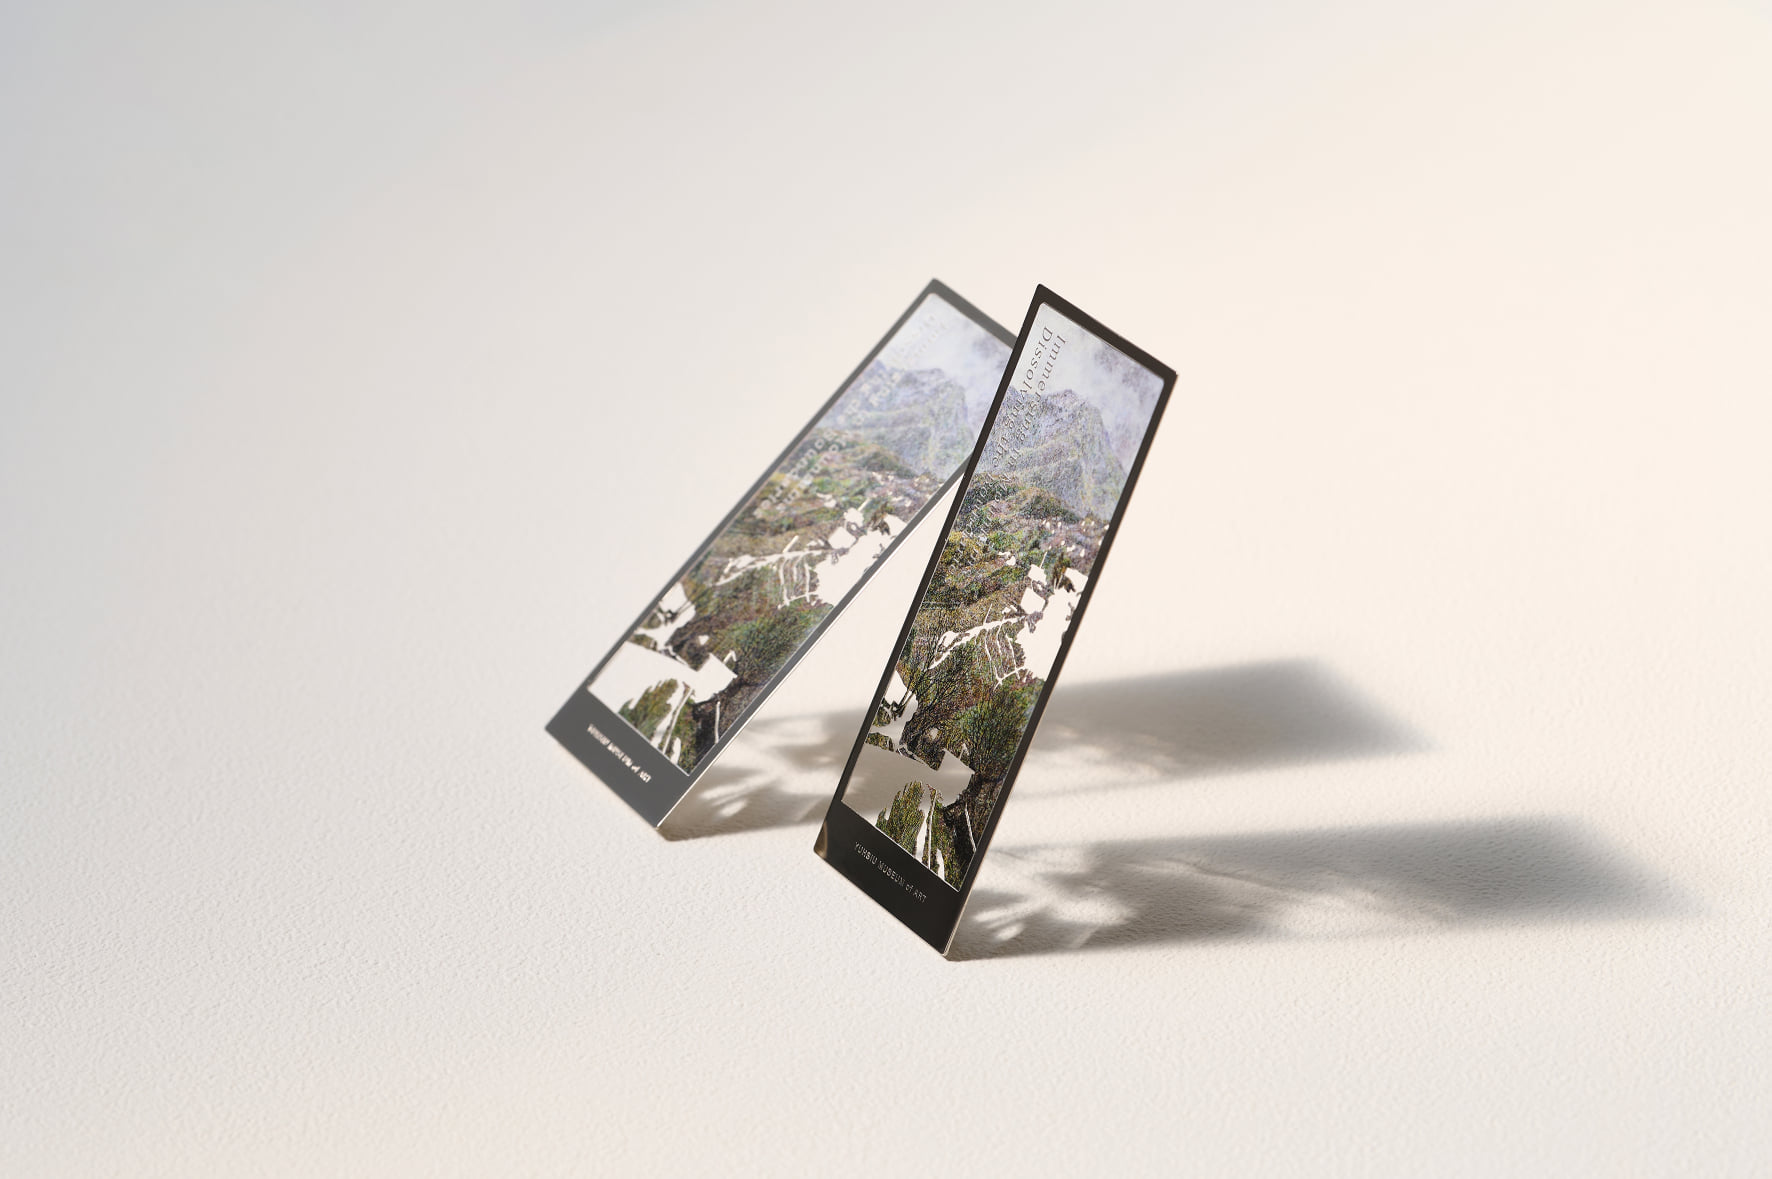 Immersing in Mountains: Dissolving the Boundaries-HUNG Tien-Yu Metal Hollow Bookmark